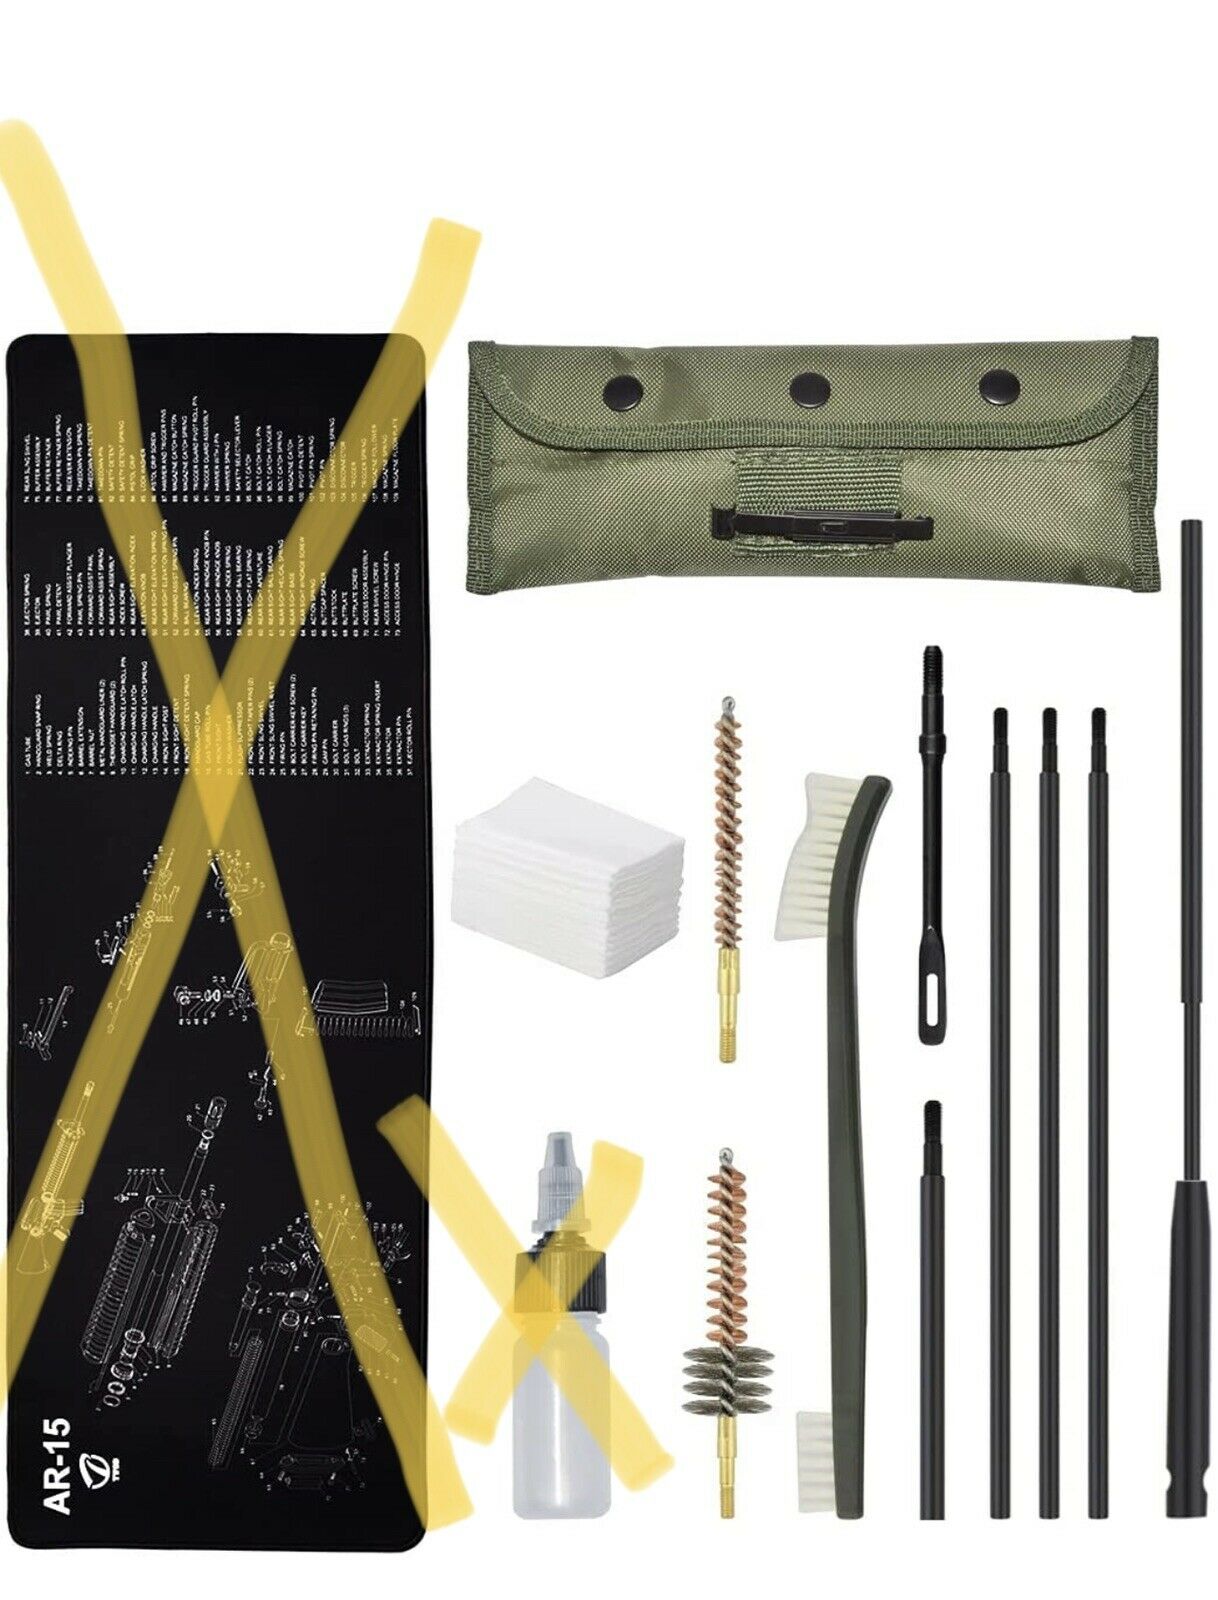 Twod Cleaning Kit, Cleaning Brushes Supplies With Accessories And Tools Pouch